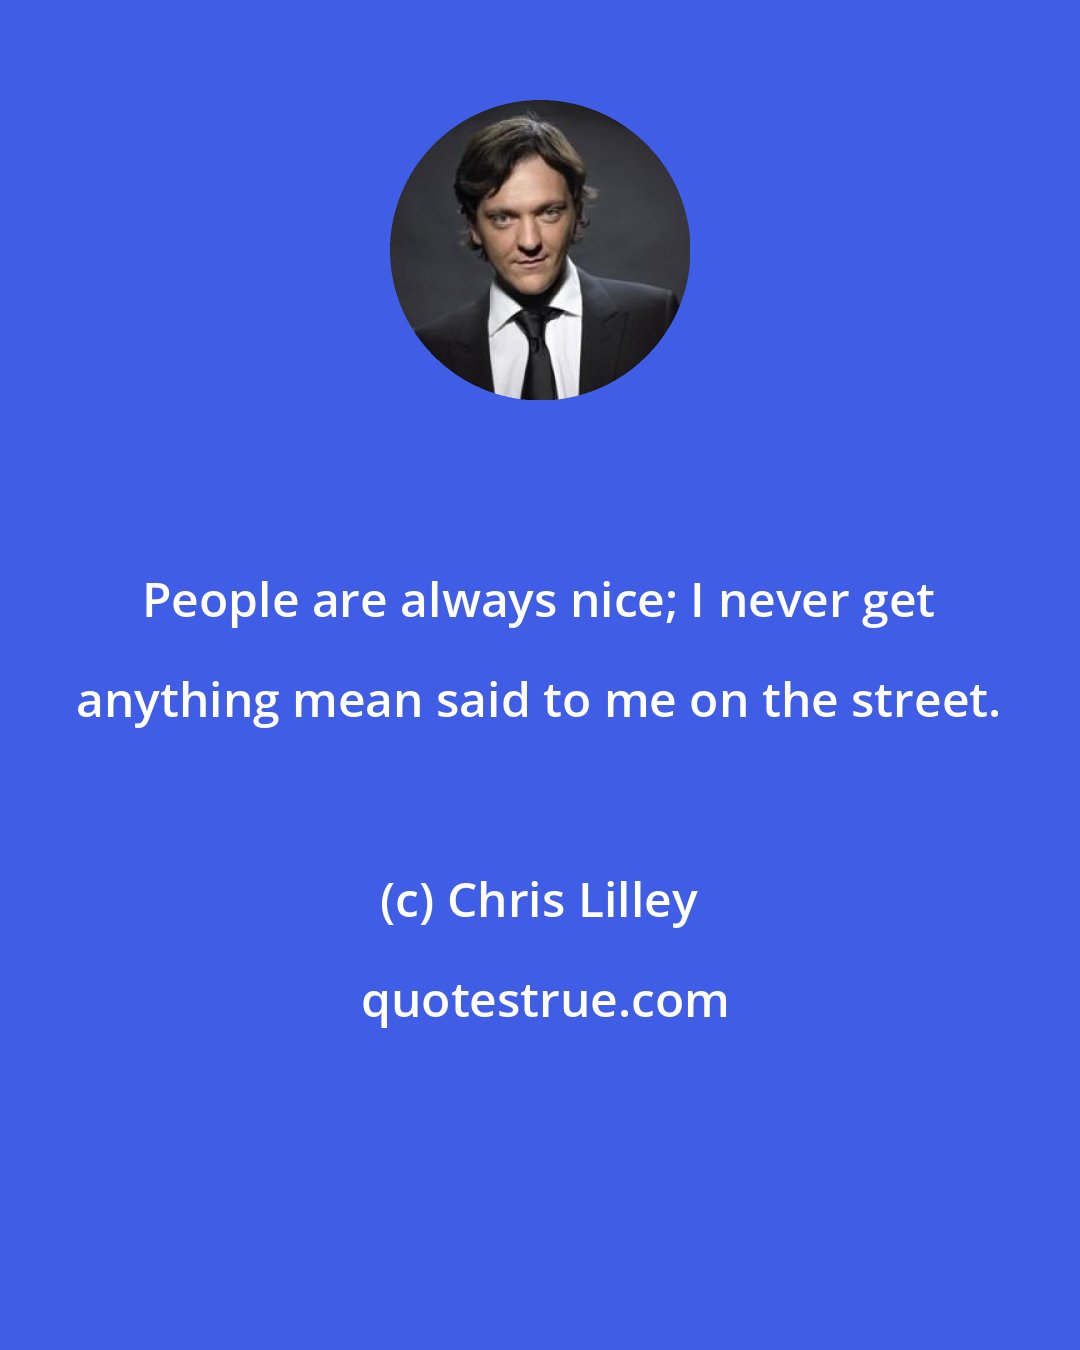 Chris Lilley: People are always nice; I never get anything mean said to me on the street.